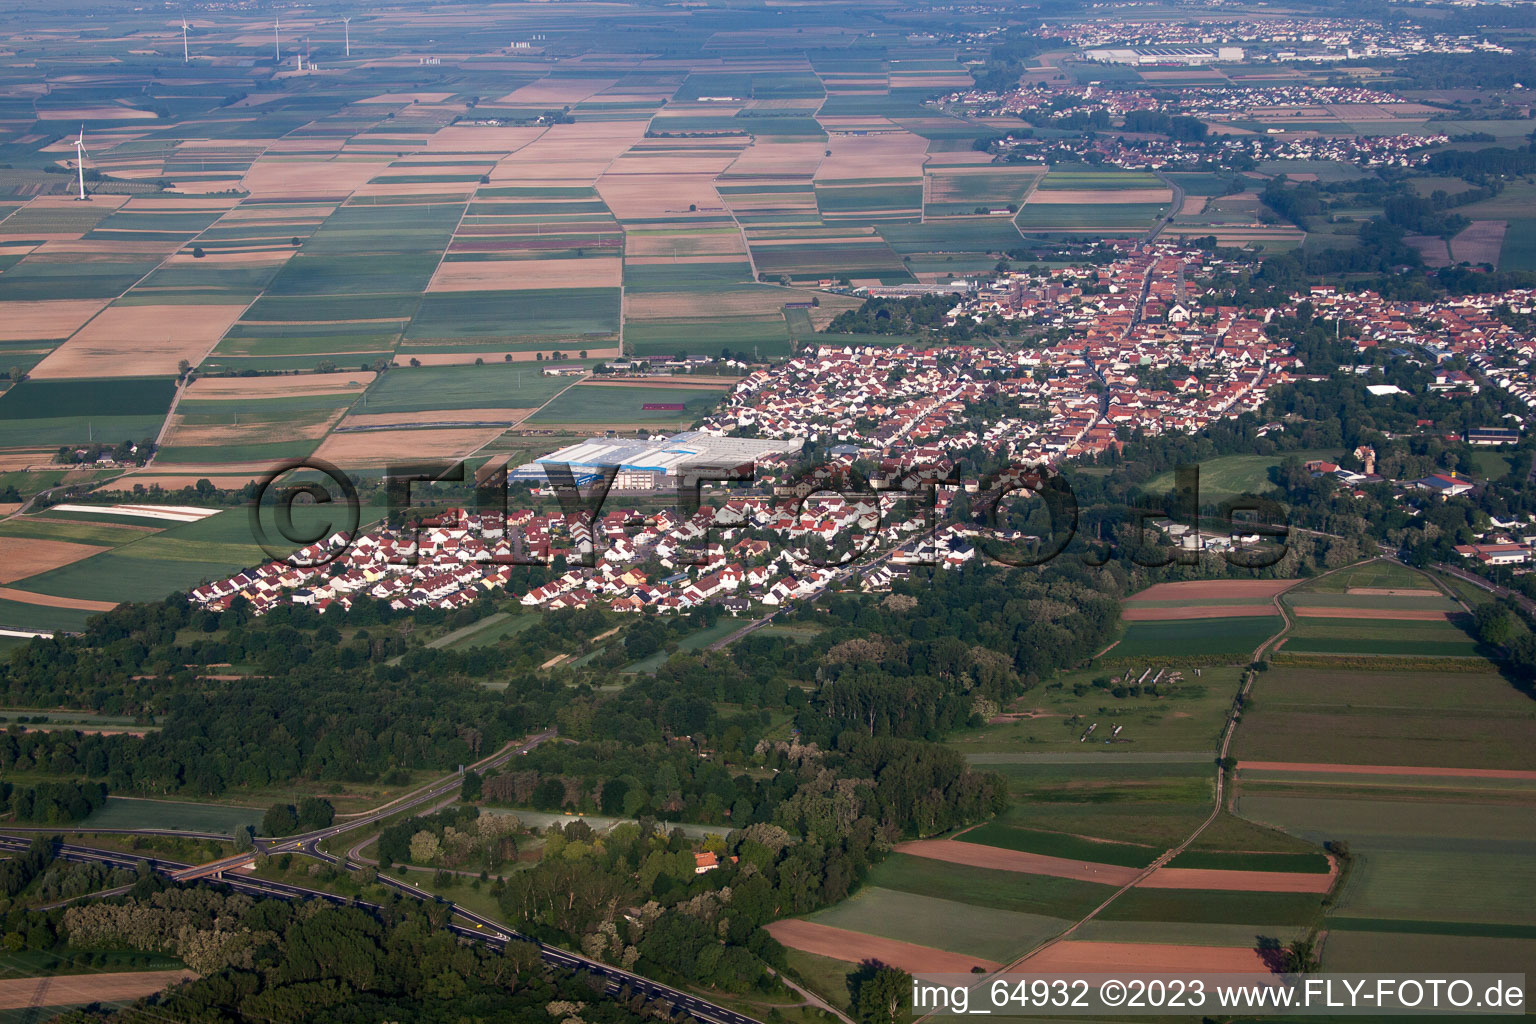 Drone image of Bellheim in the state Rhineland-Palatinate, Germany